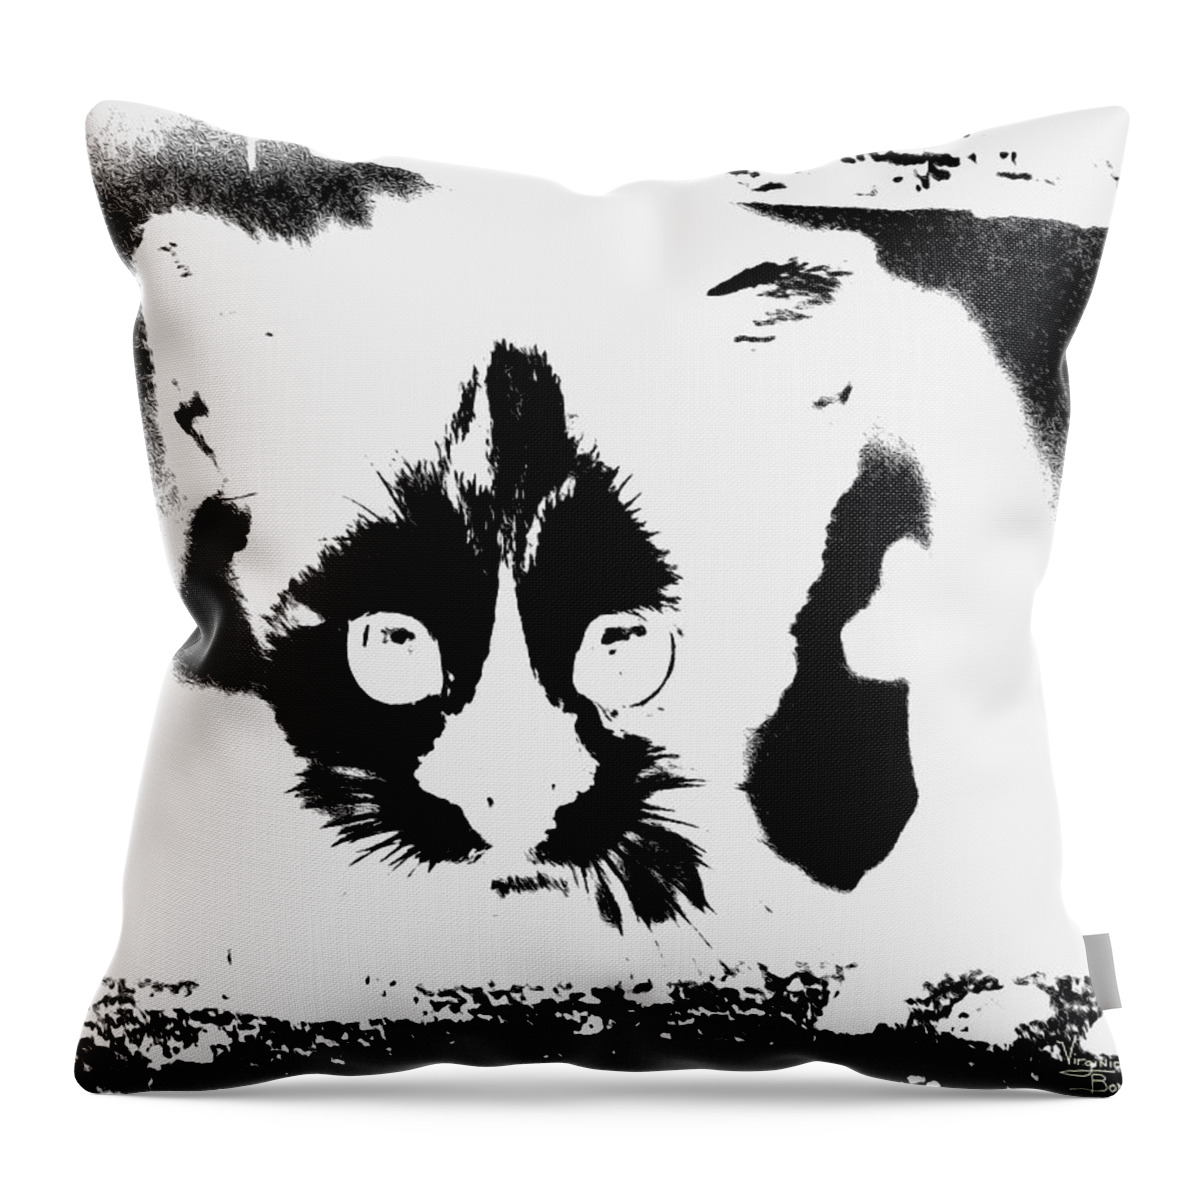 Black Andd White Throw Pillow featuring the painting    I See You by Virginia Bond